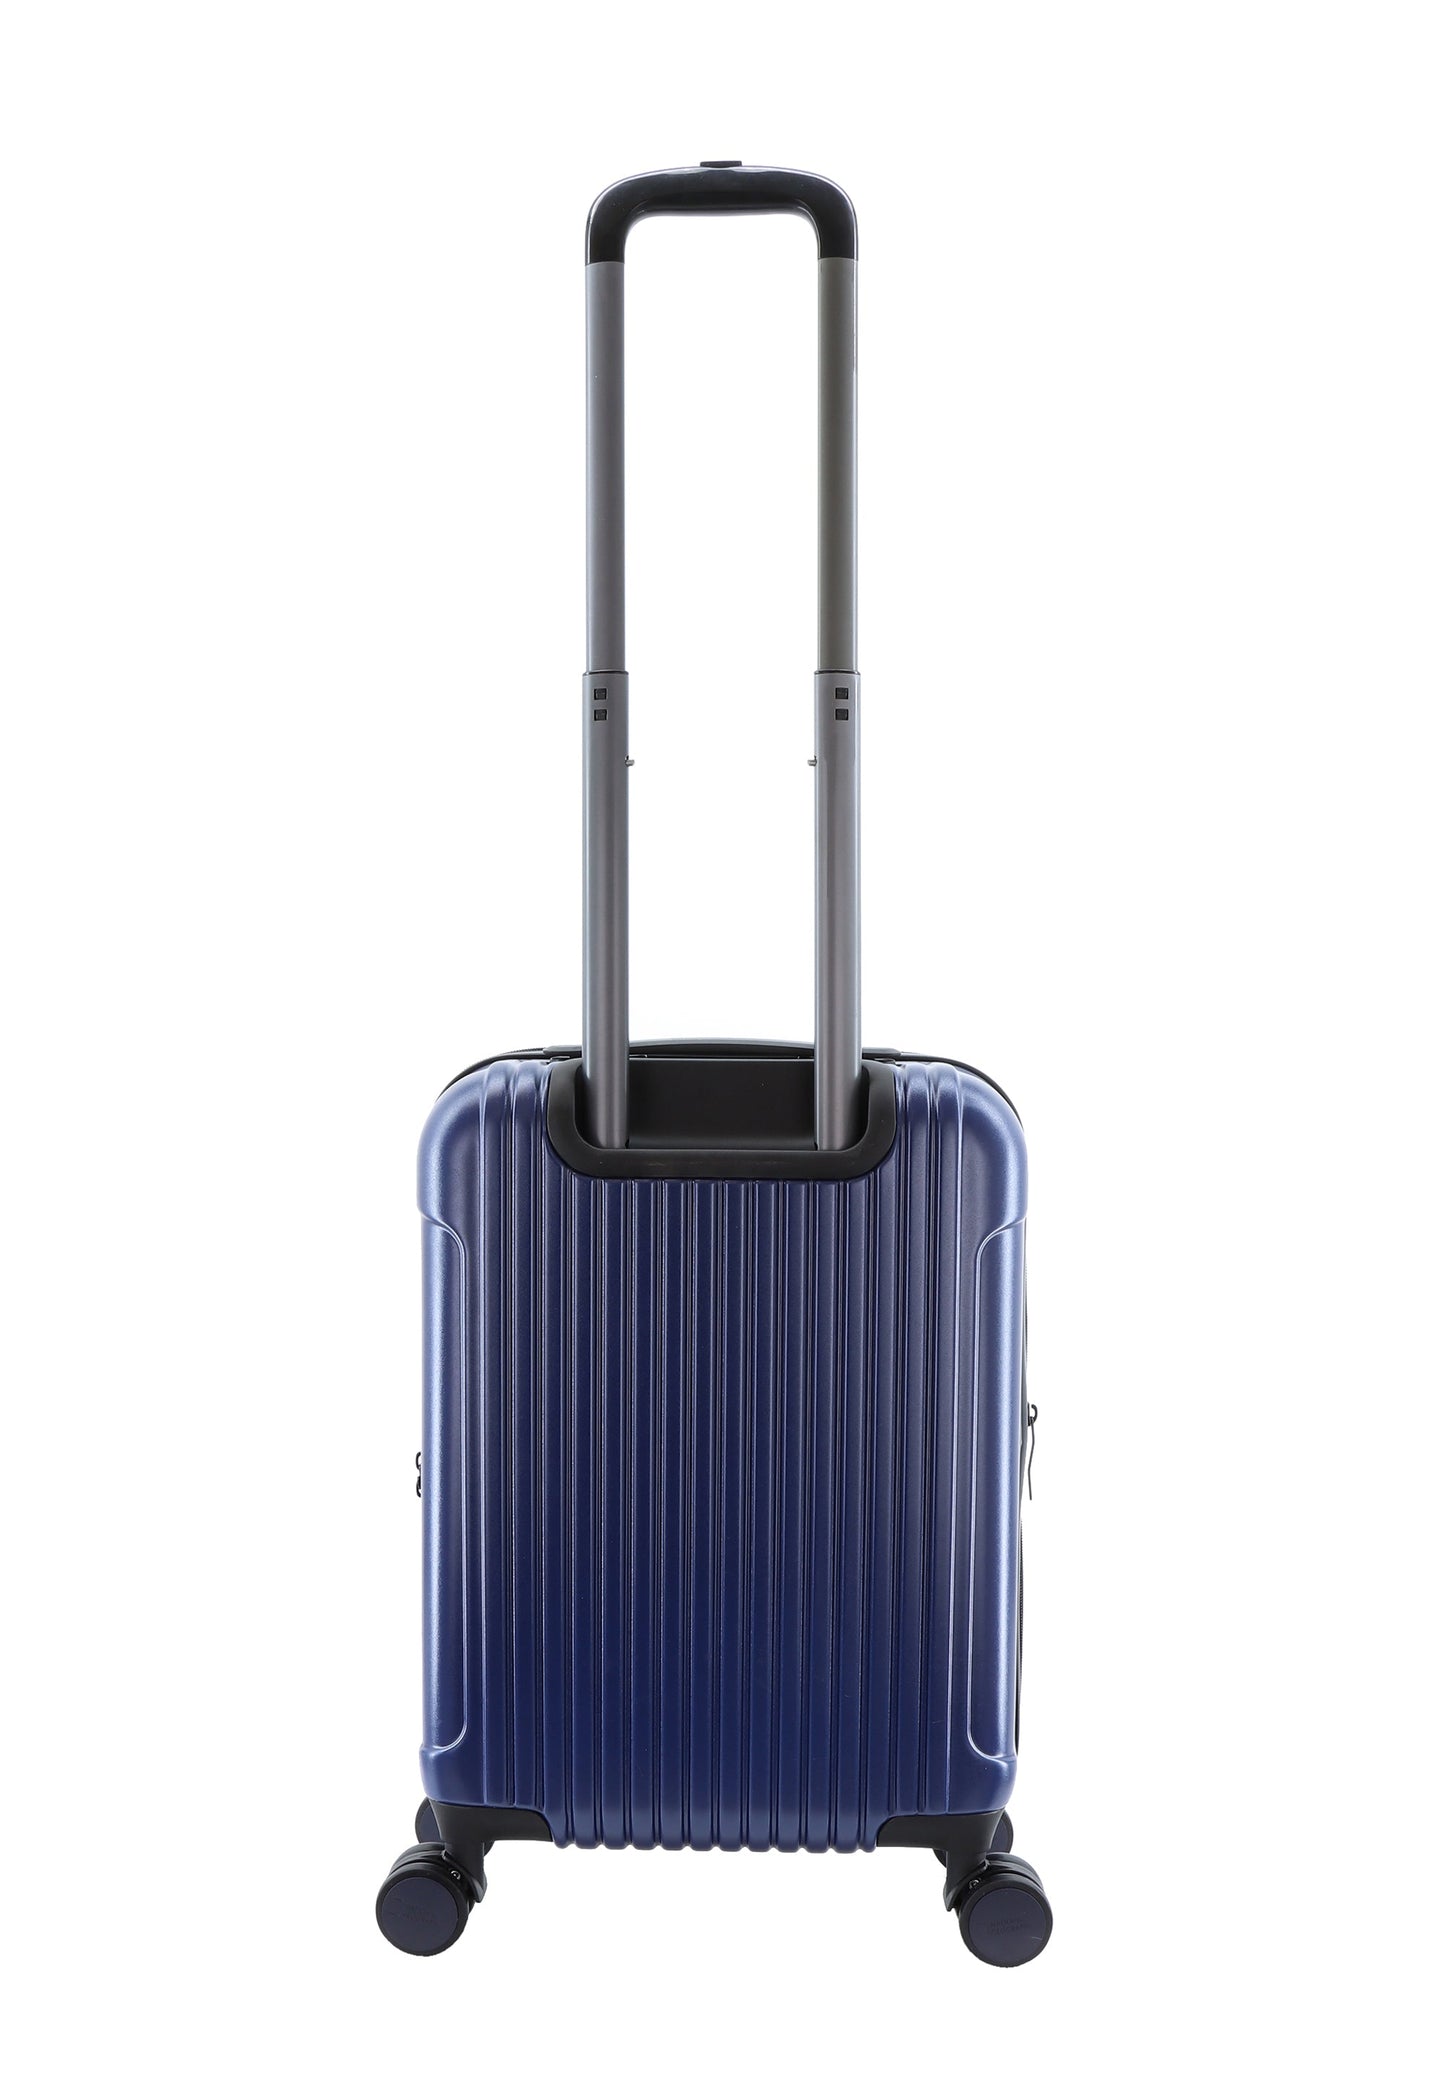 National Geographic Canyon S - Achterkant Blauw hard reiskoffer | luggage4u.be